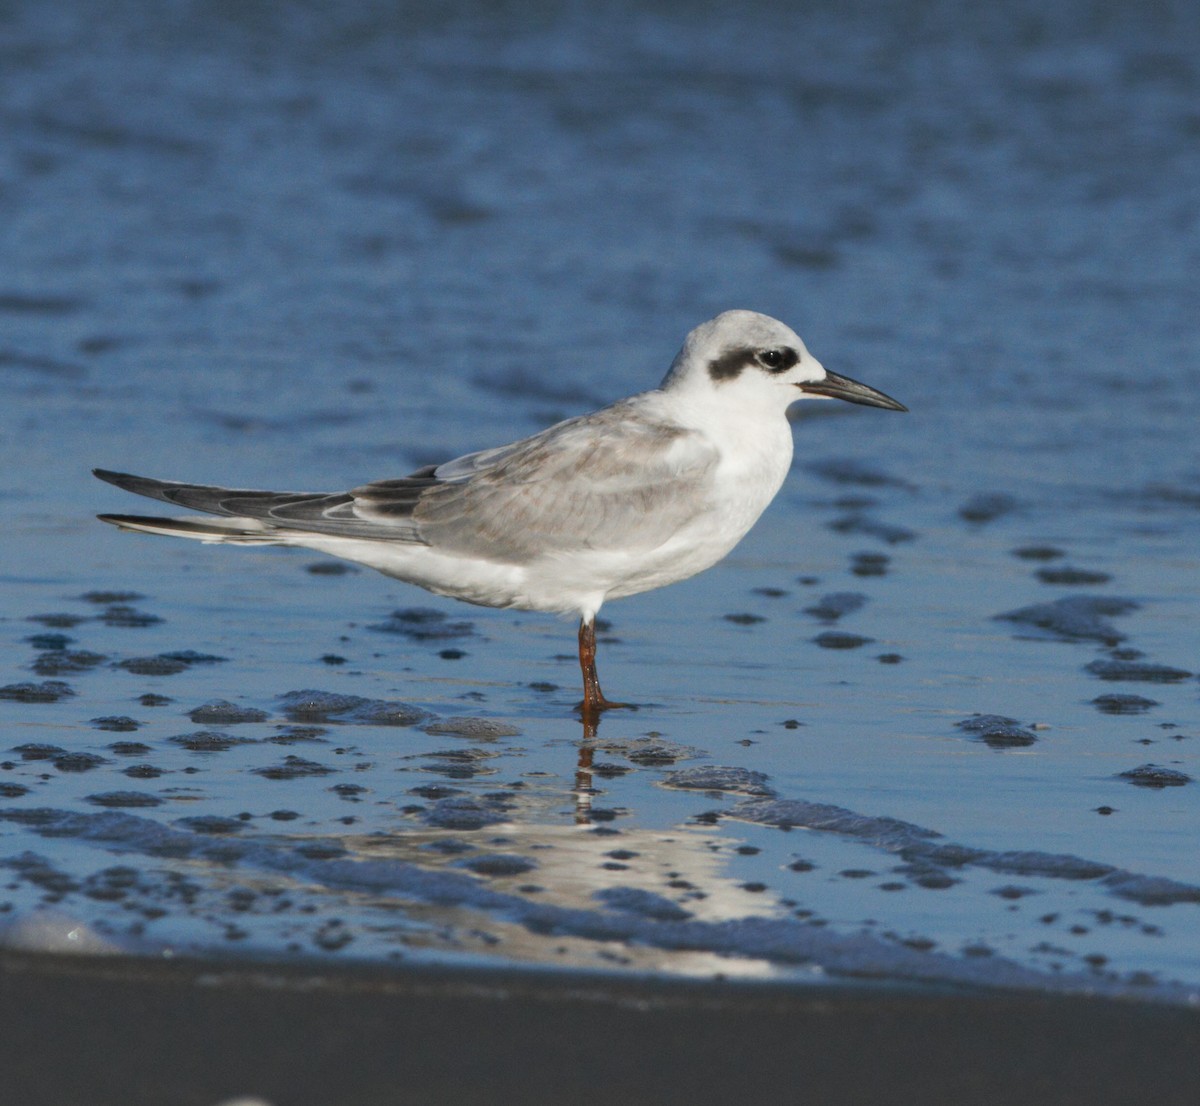 Snowy-crowned Tern - Christian Andretti